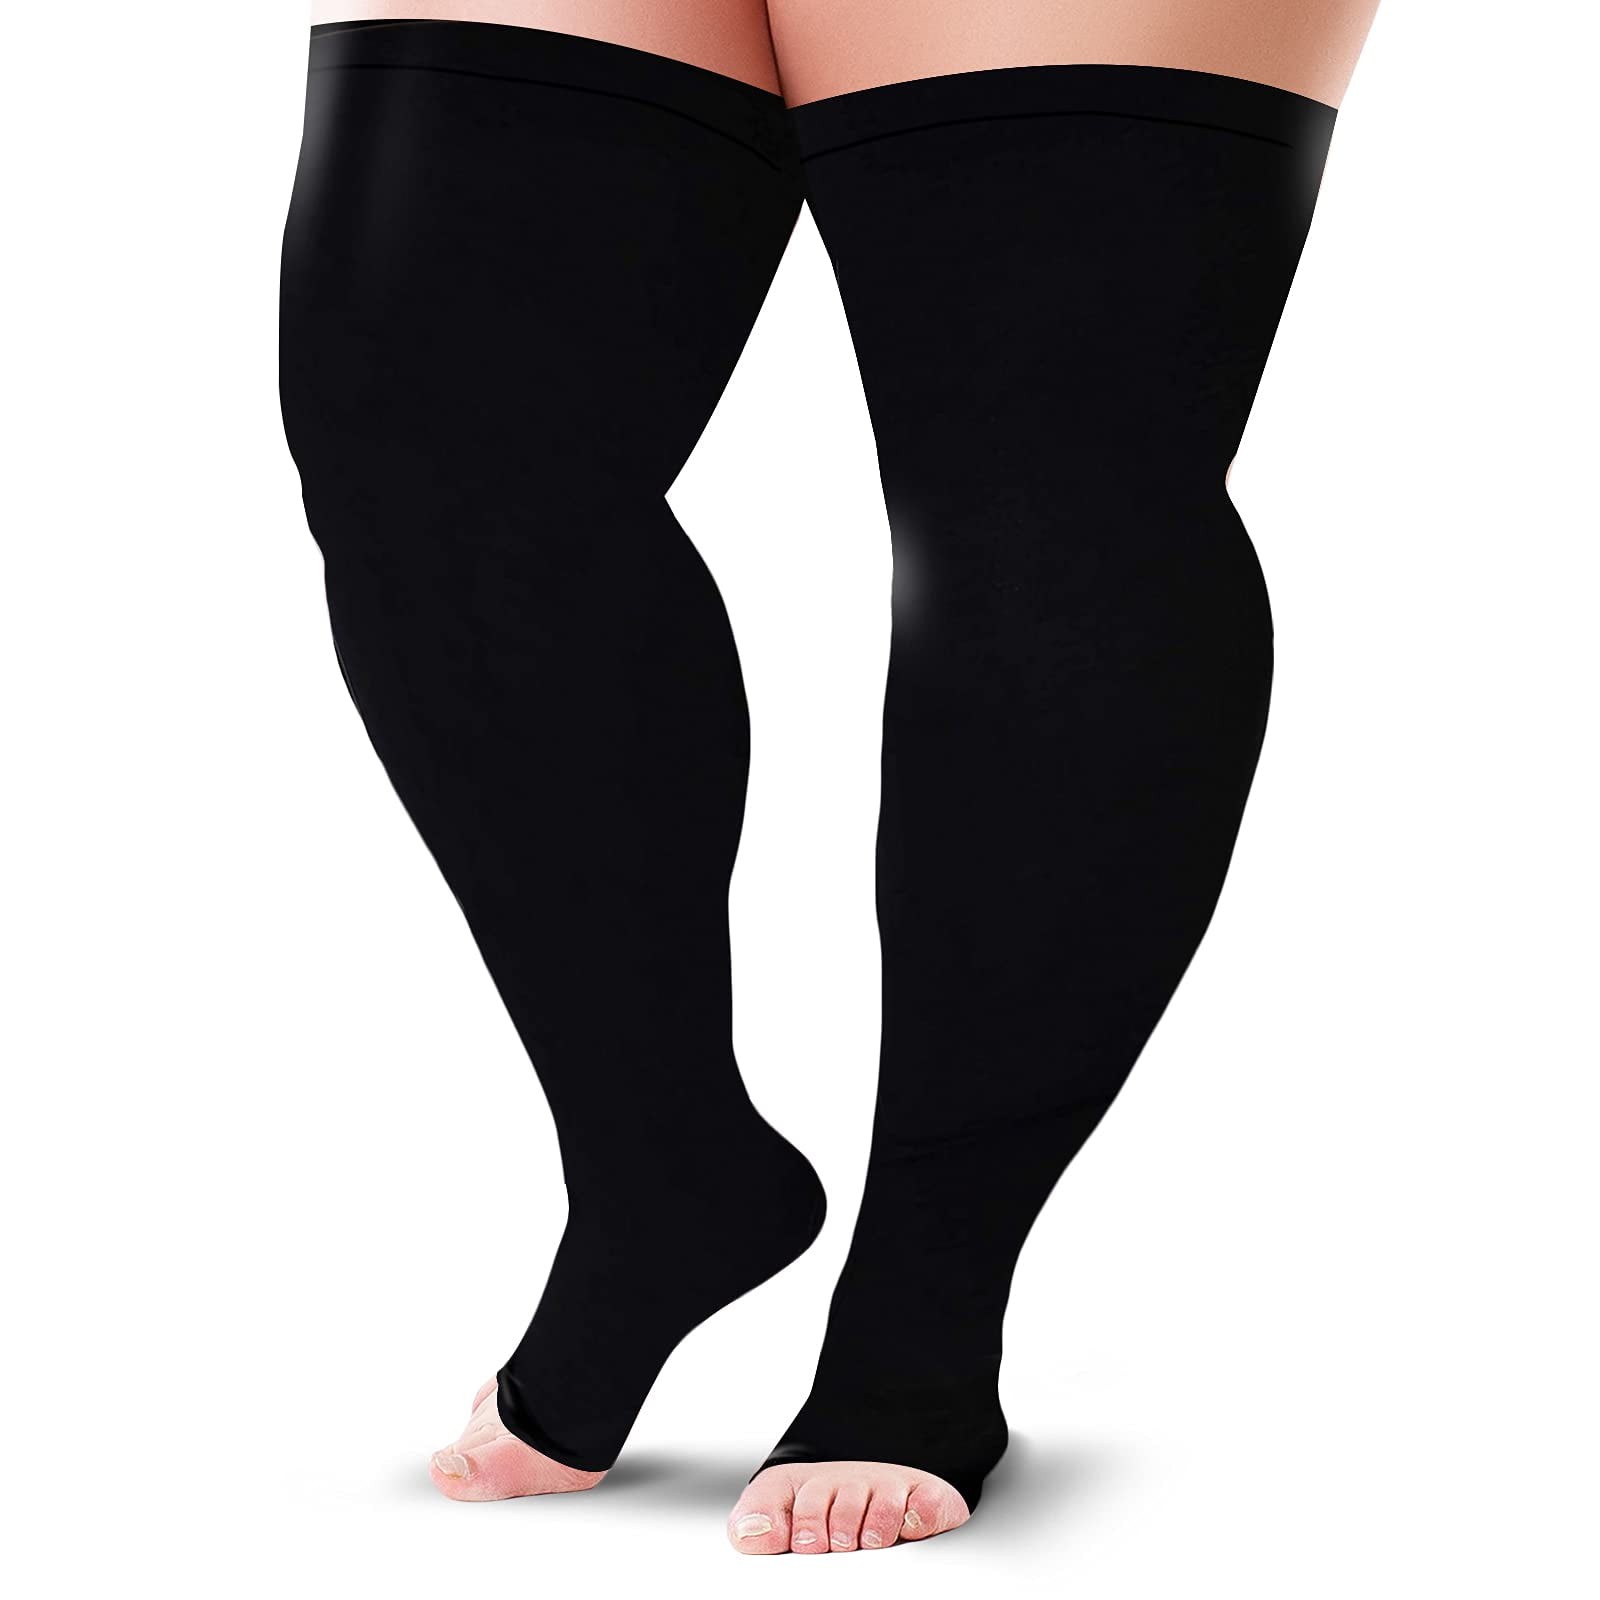 Ktinnead Thigh High Compression Stockings Footless 20-30mmHg for Men & Women  Black Large